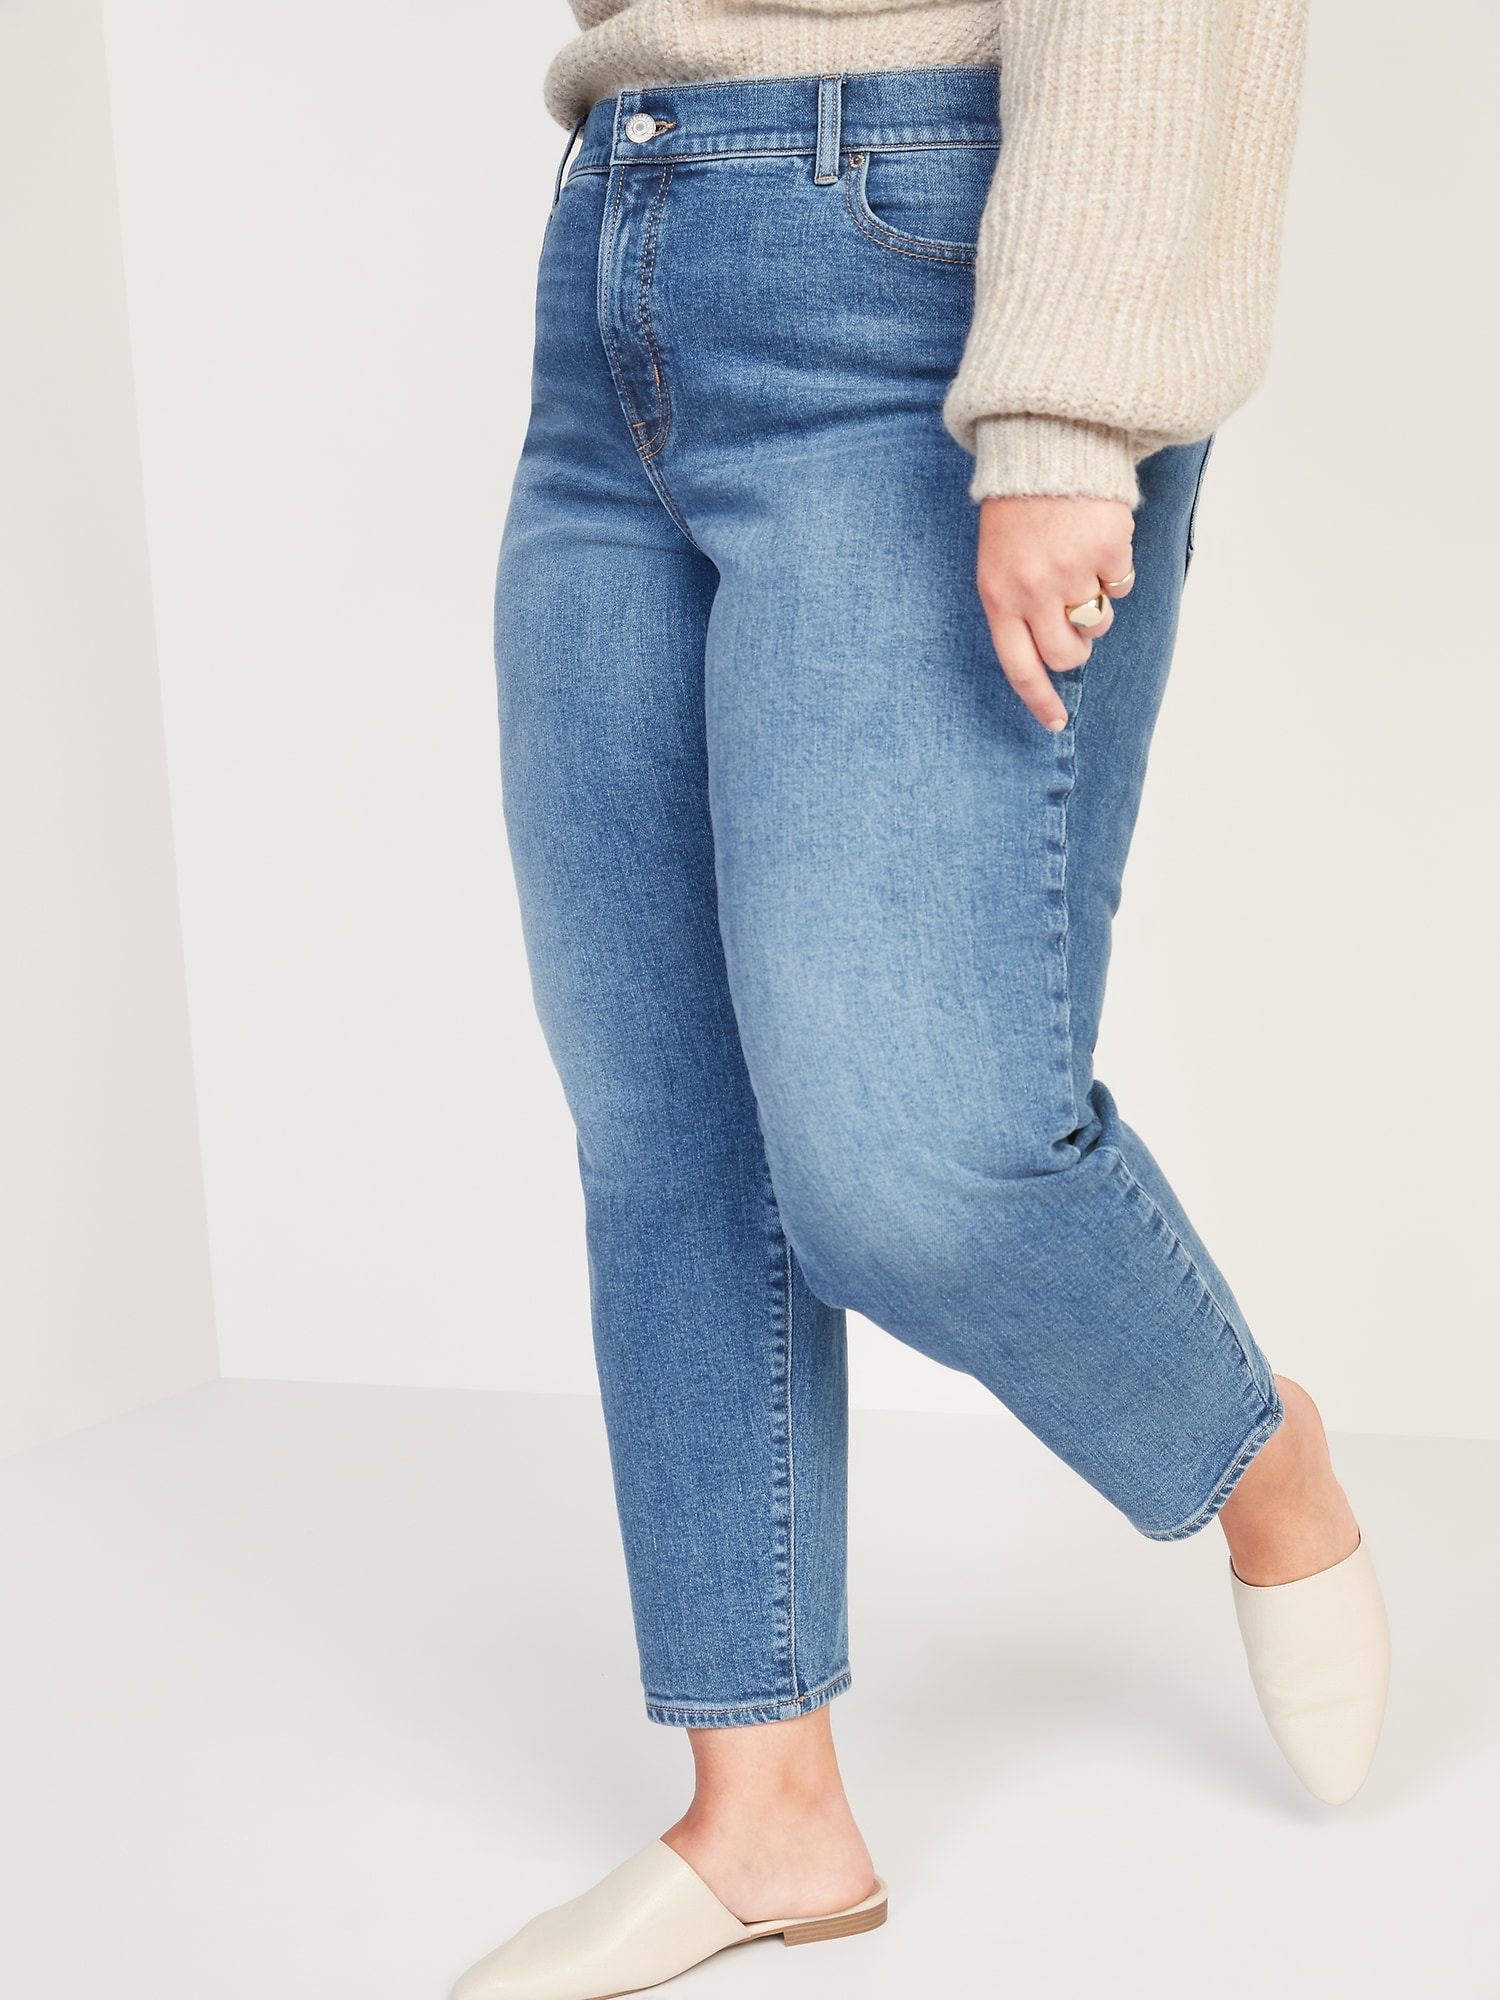 Old Navy + High-Waisted Secret-Slim Pockets O.G. Straight Plus-Size Jeans